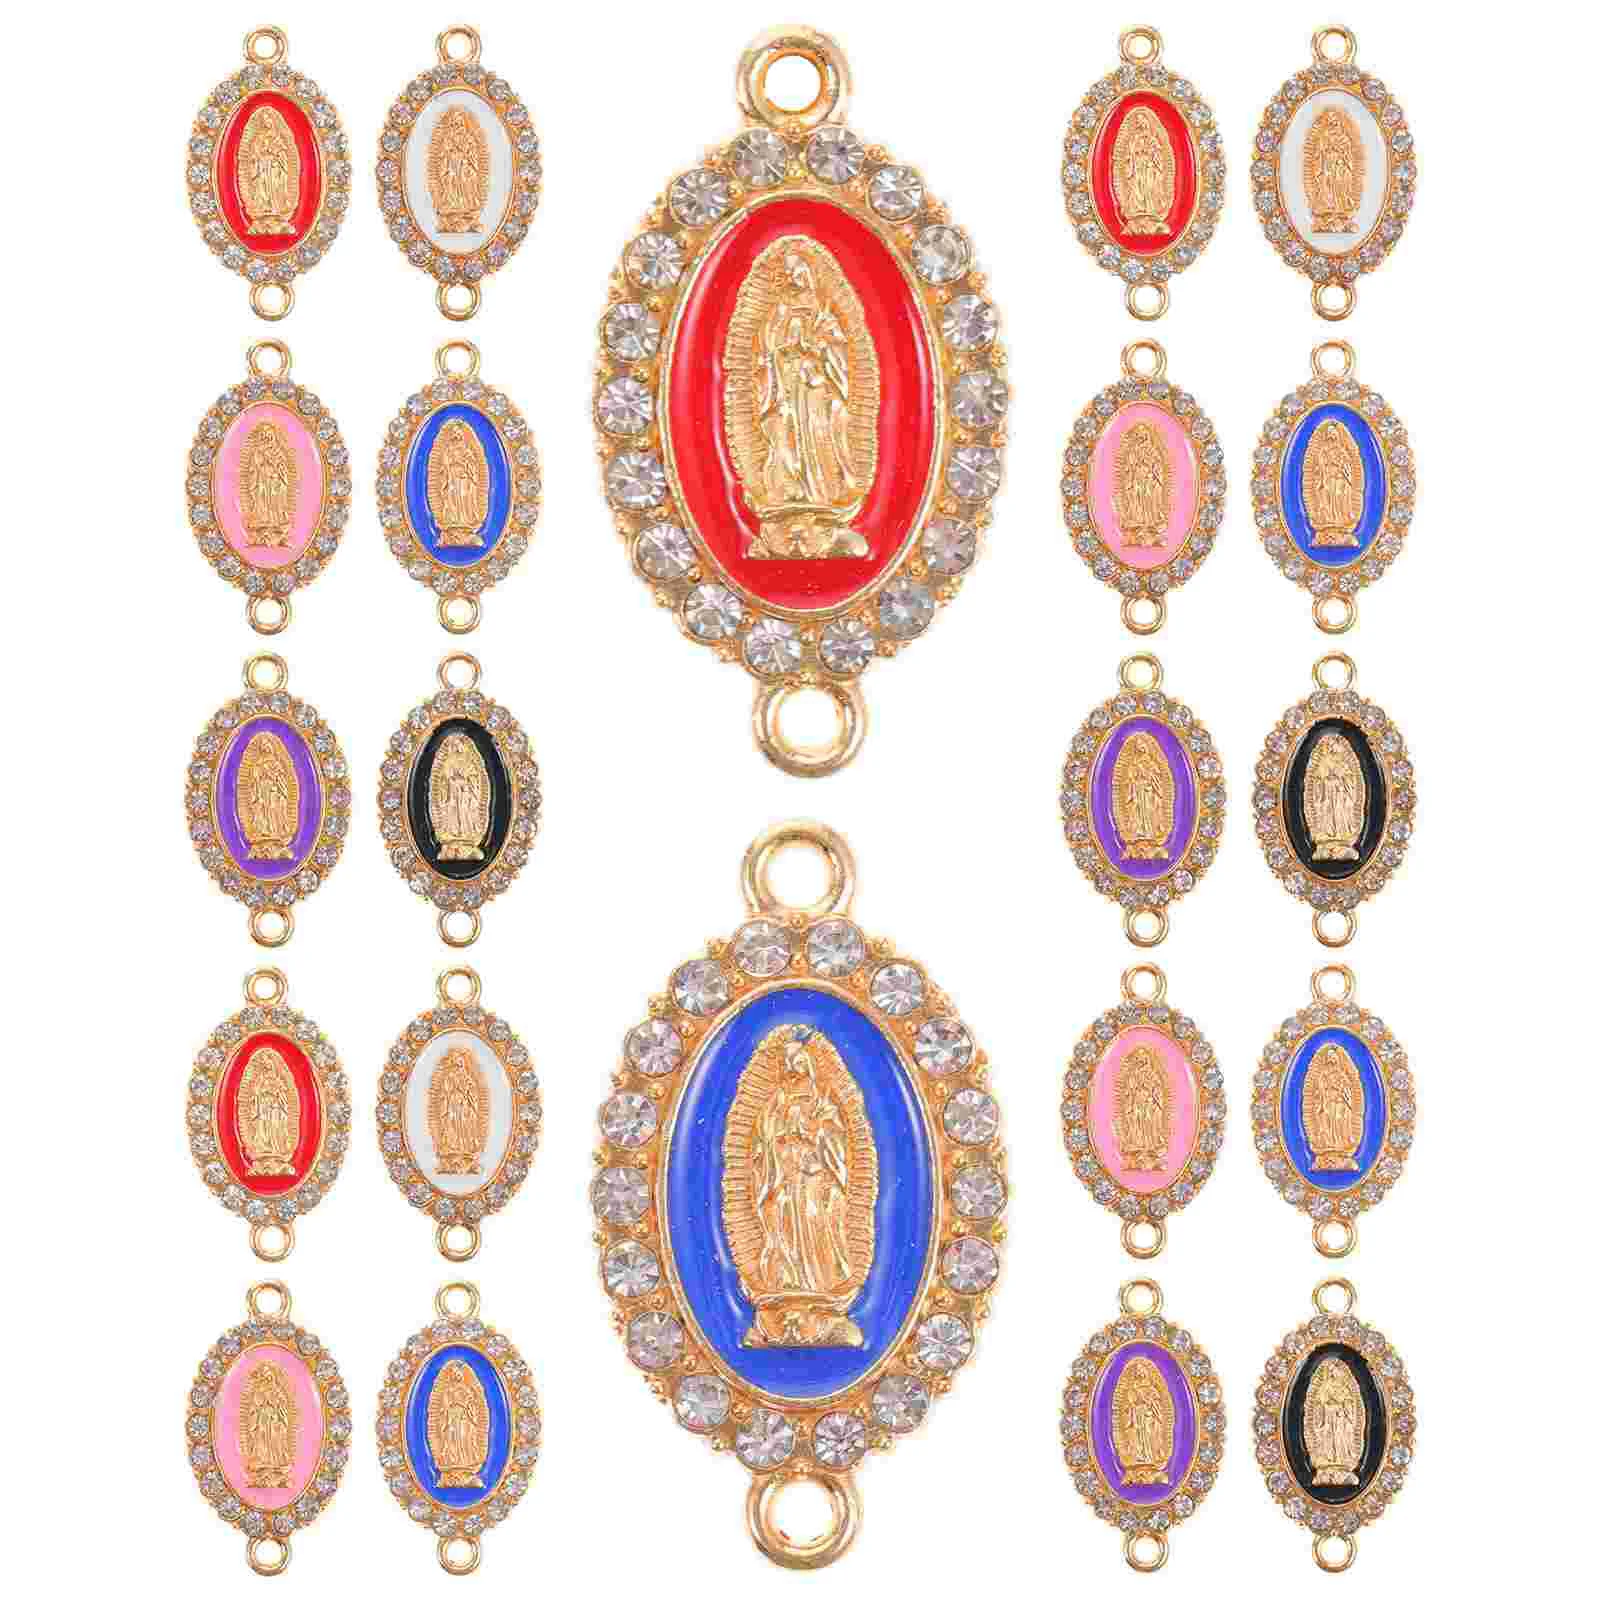 

24 Pcs Virgin Mary Bracelet Our Lady Pendant DIY Jewelry Accessories Charms Making for Crafts Miss